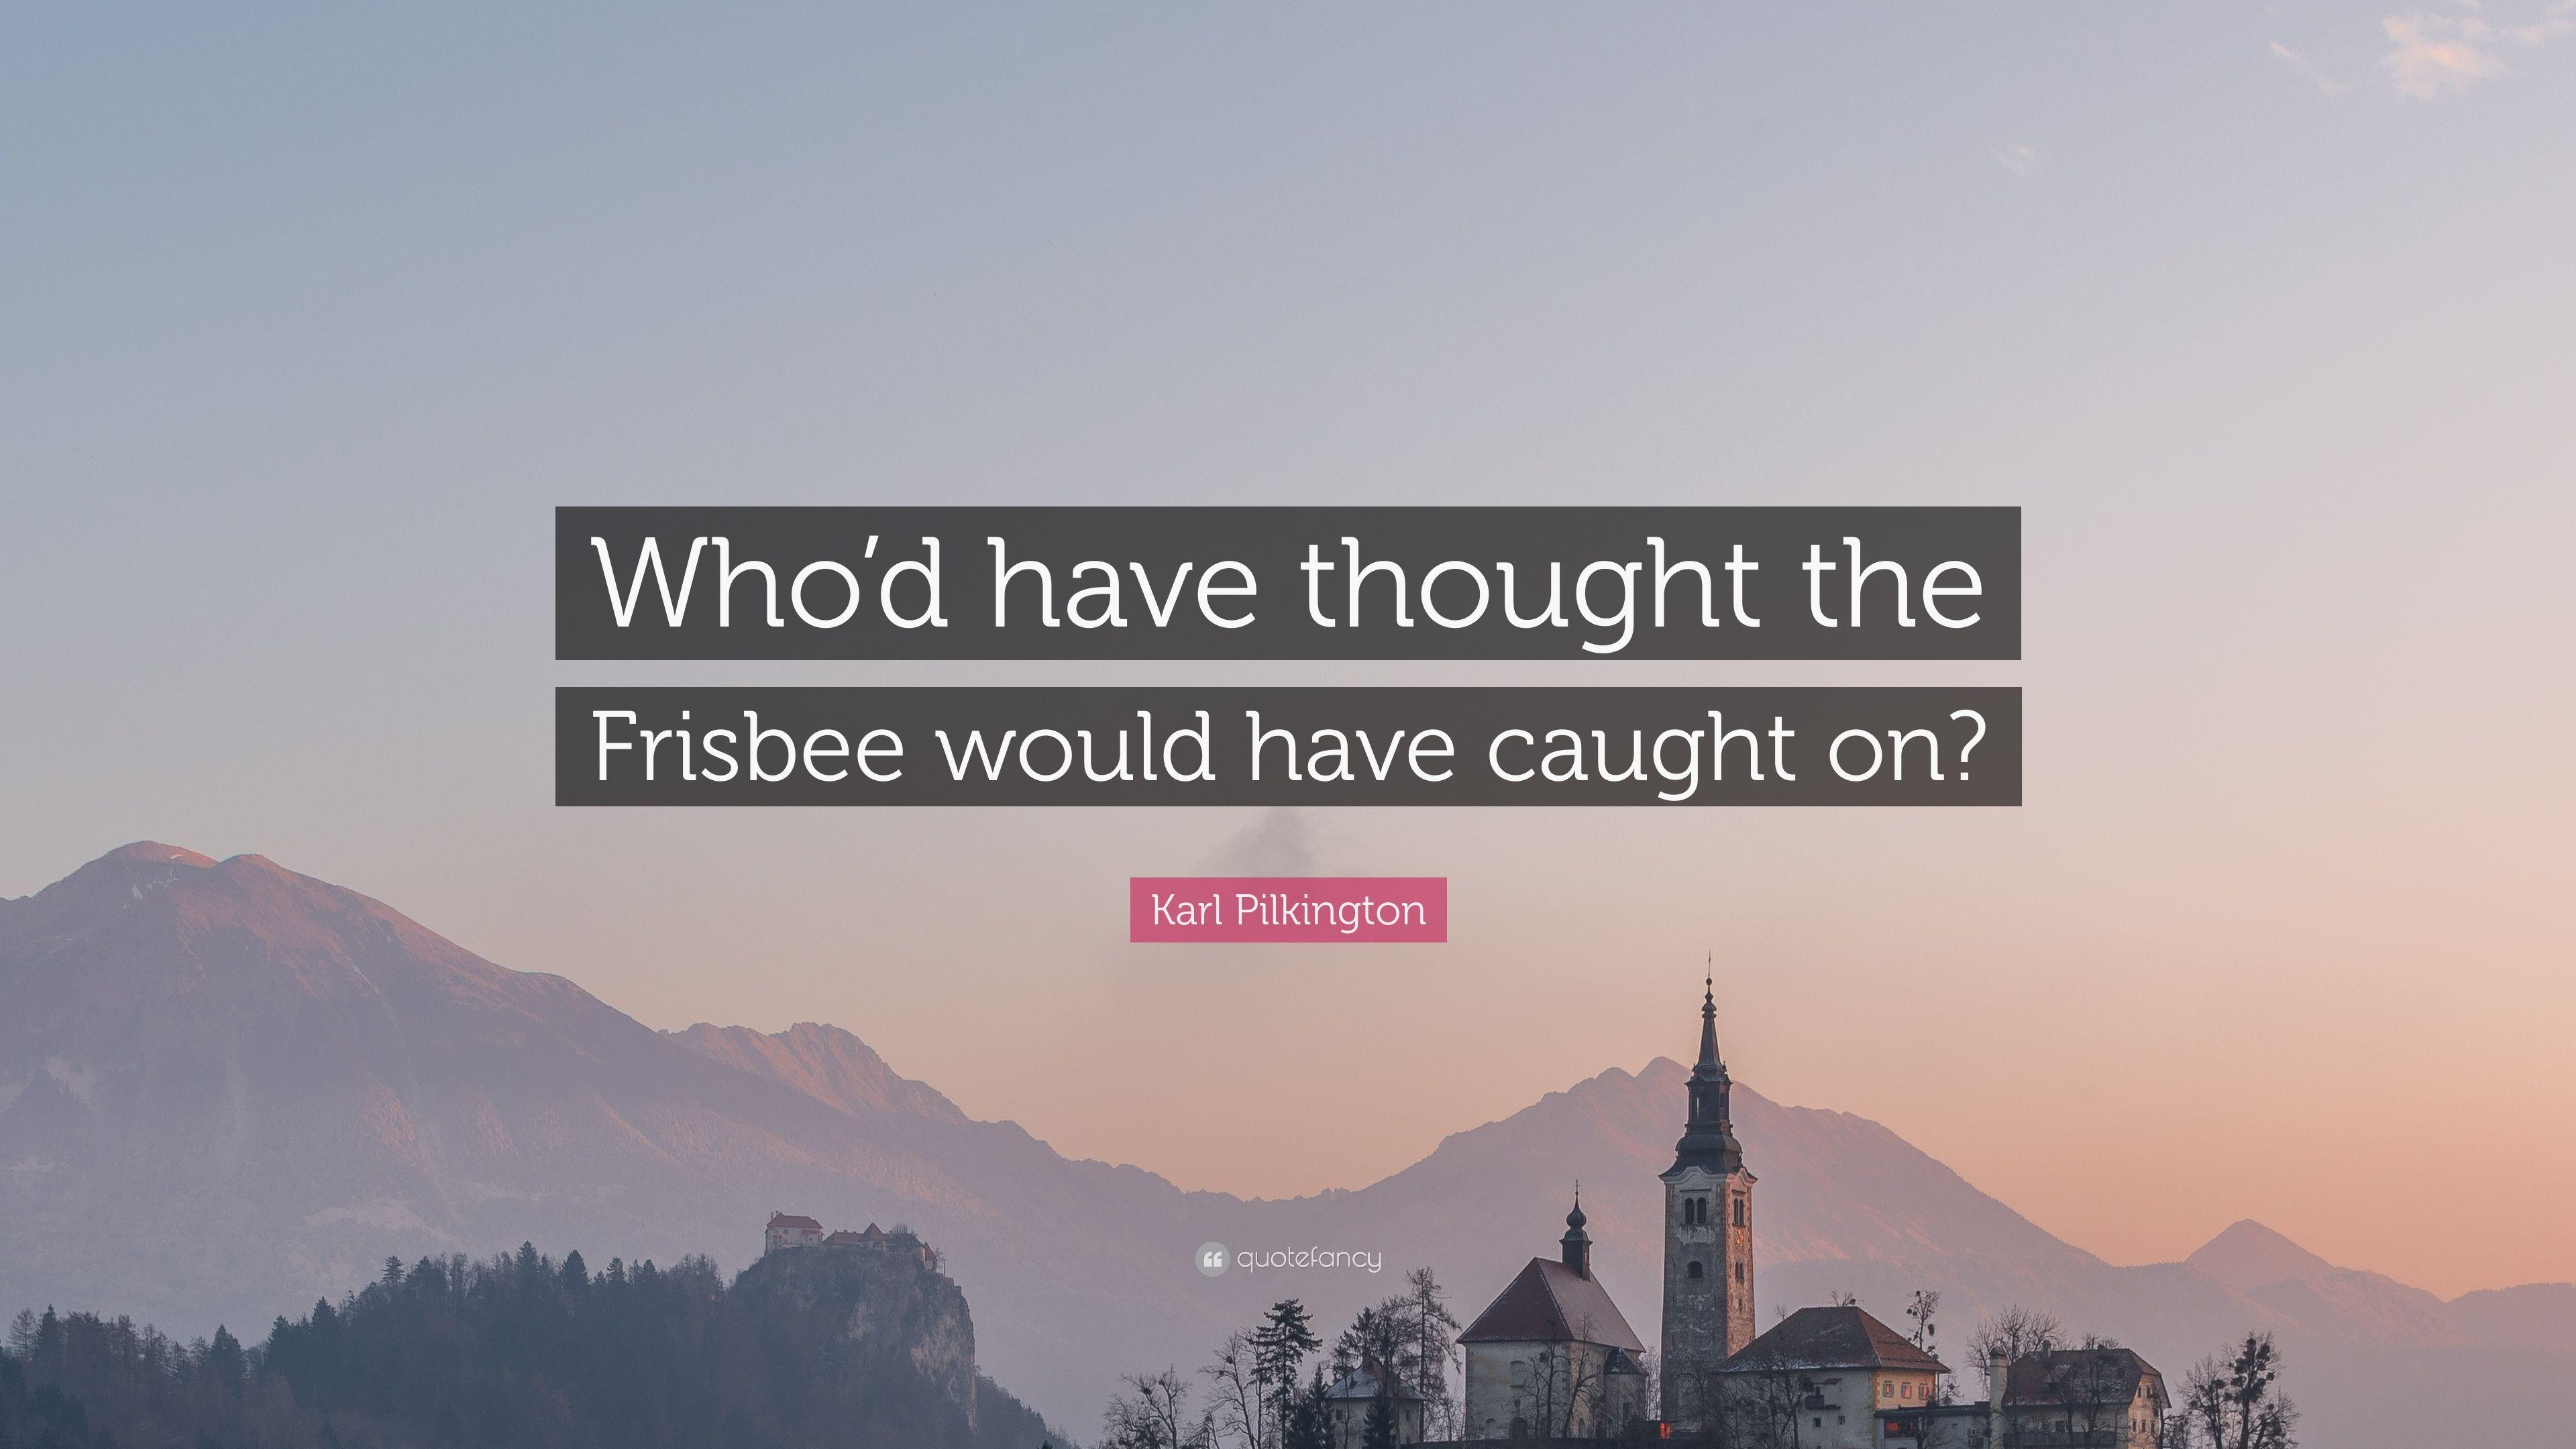 Karl Pilkington Quote: “Who'd have thought the Frisbee would have